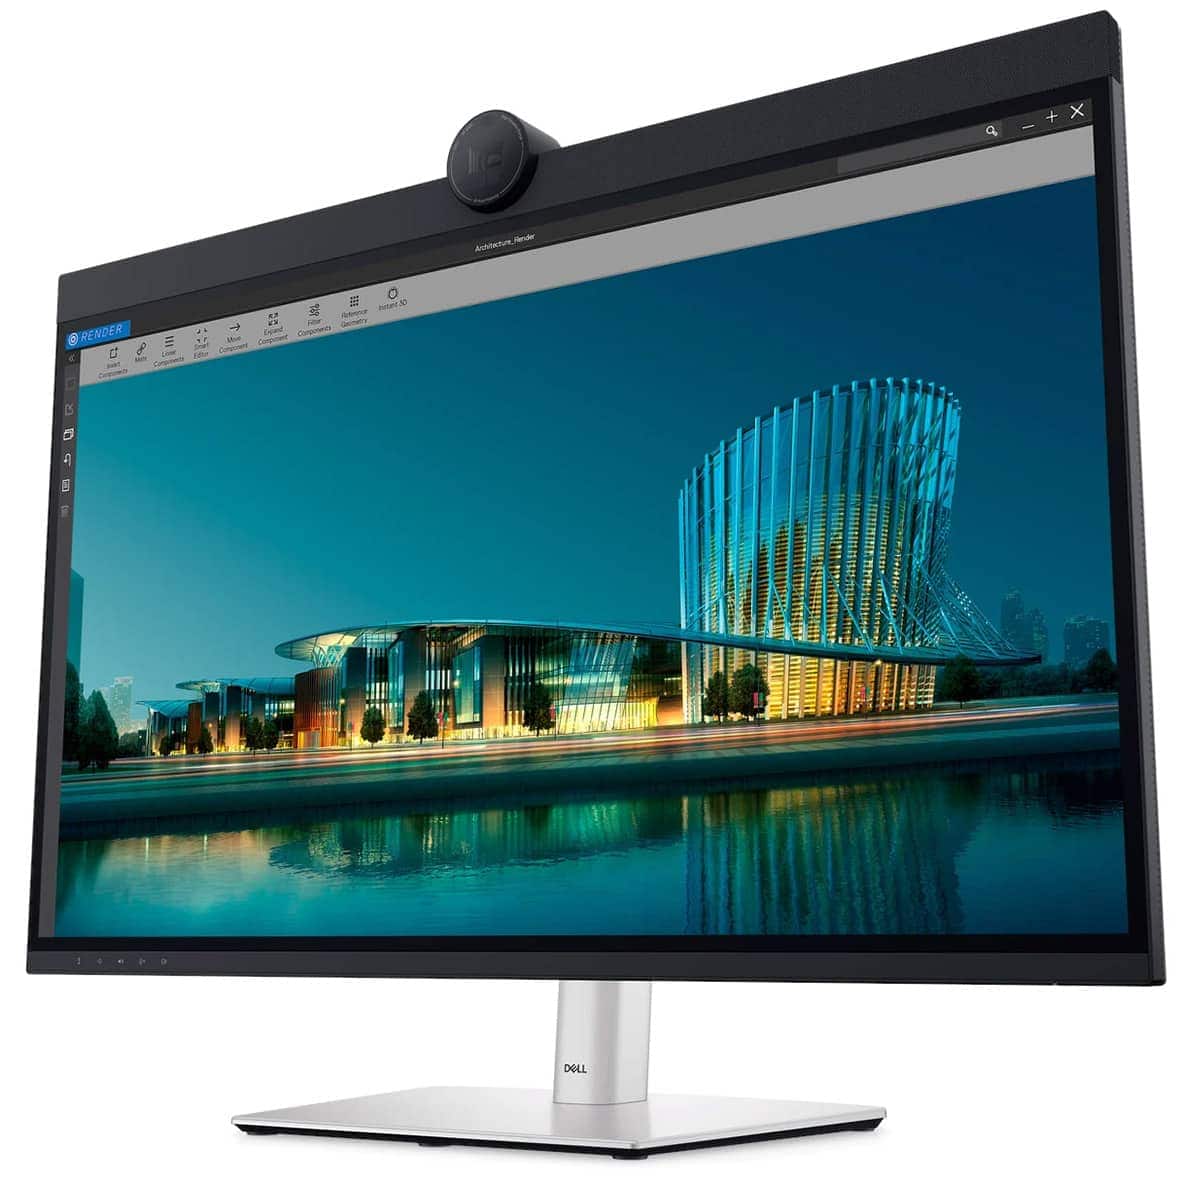 Dell's new 32-inch 6K display packs a lot of features for productivity.